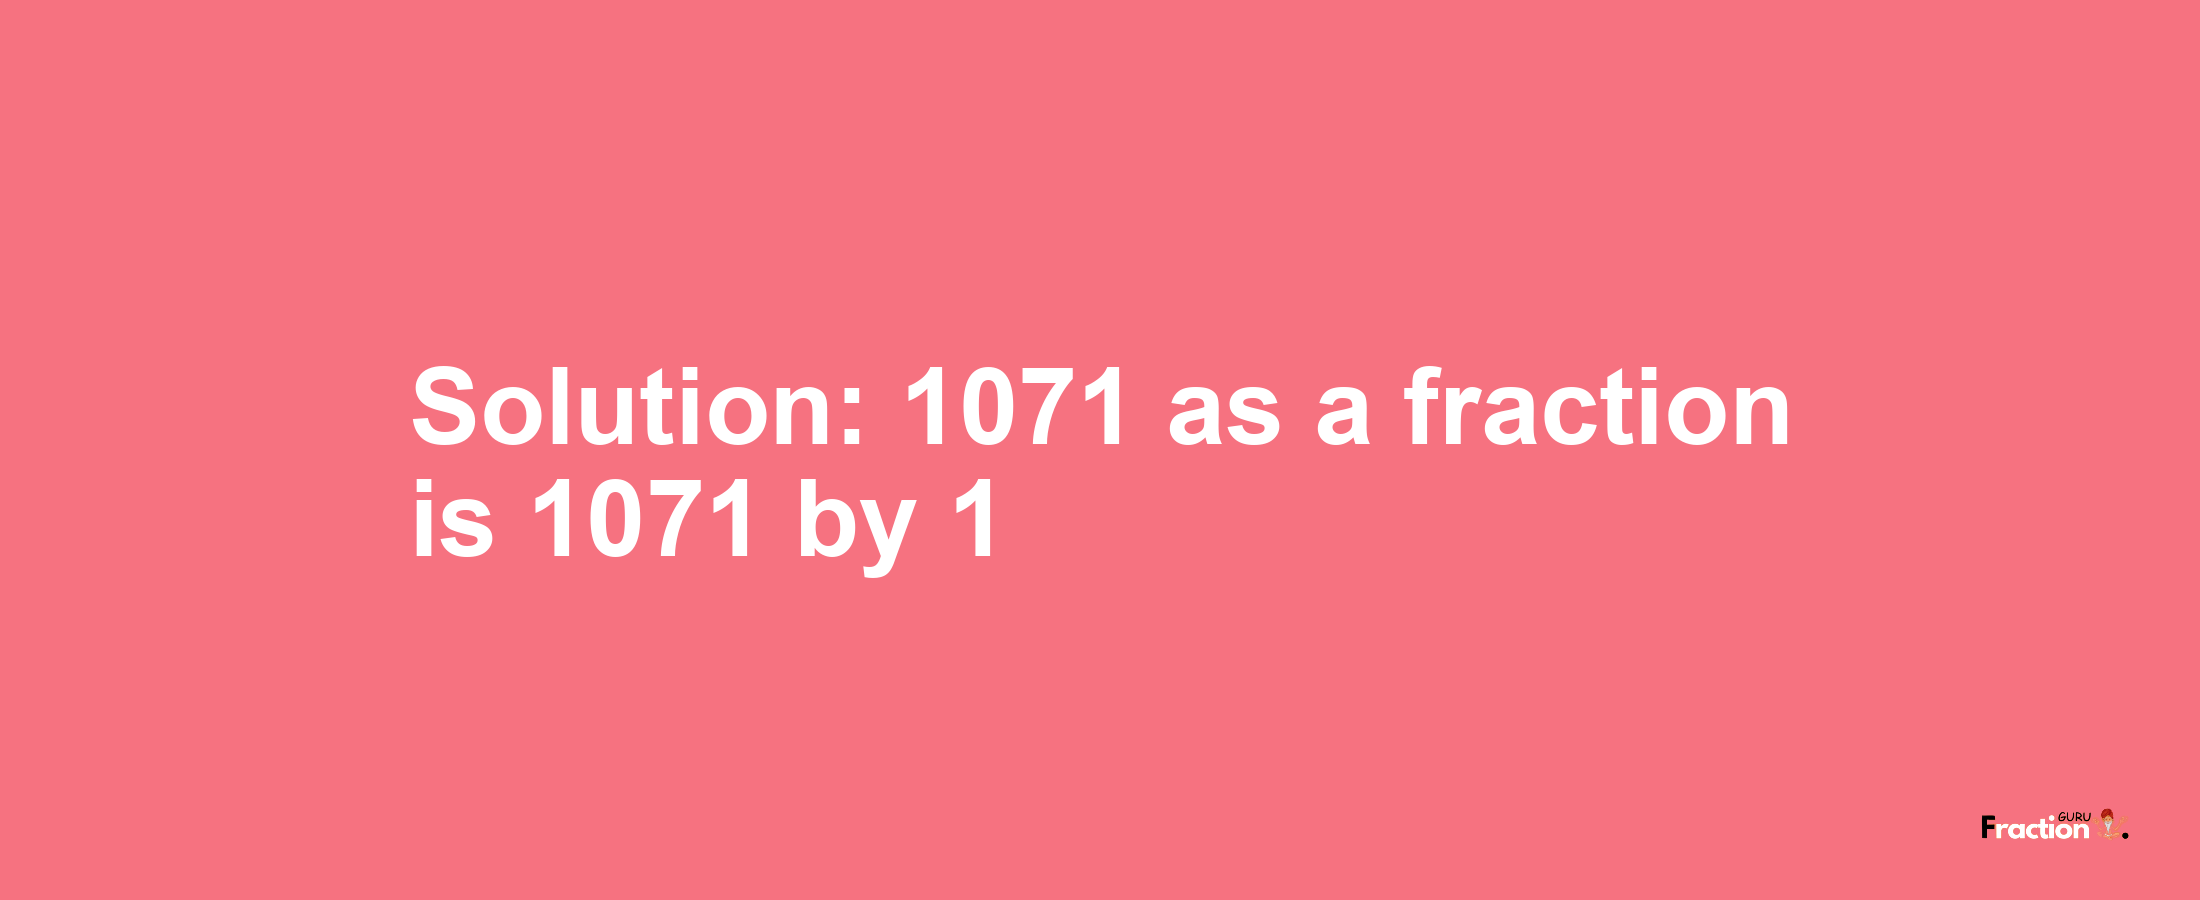 Solution:1071 as a fraction is 1071/1